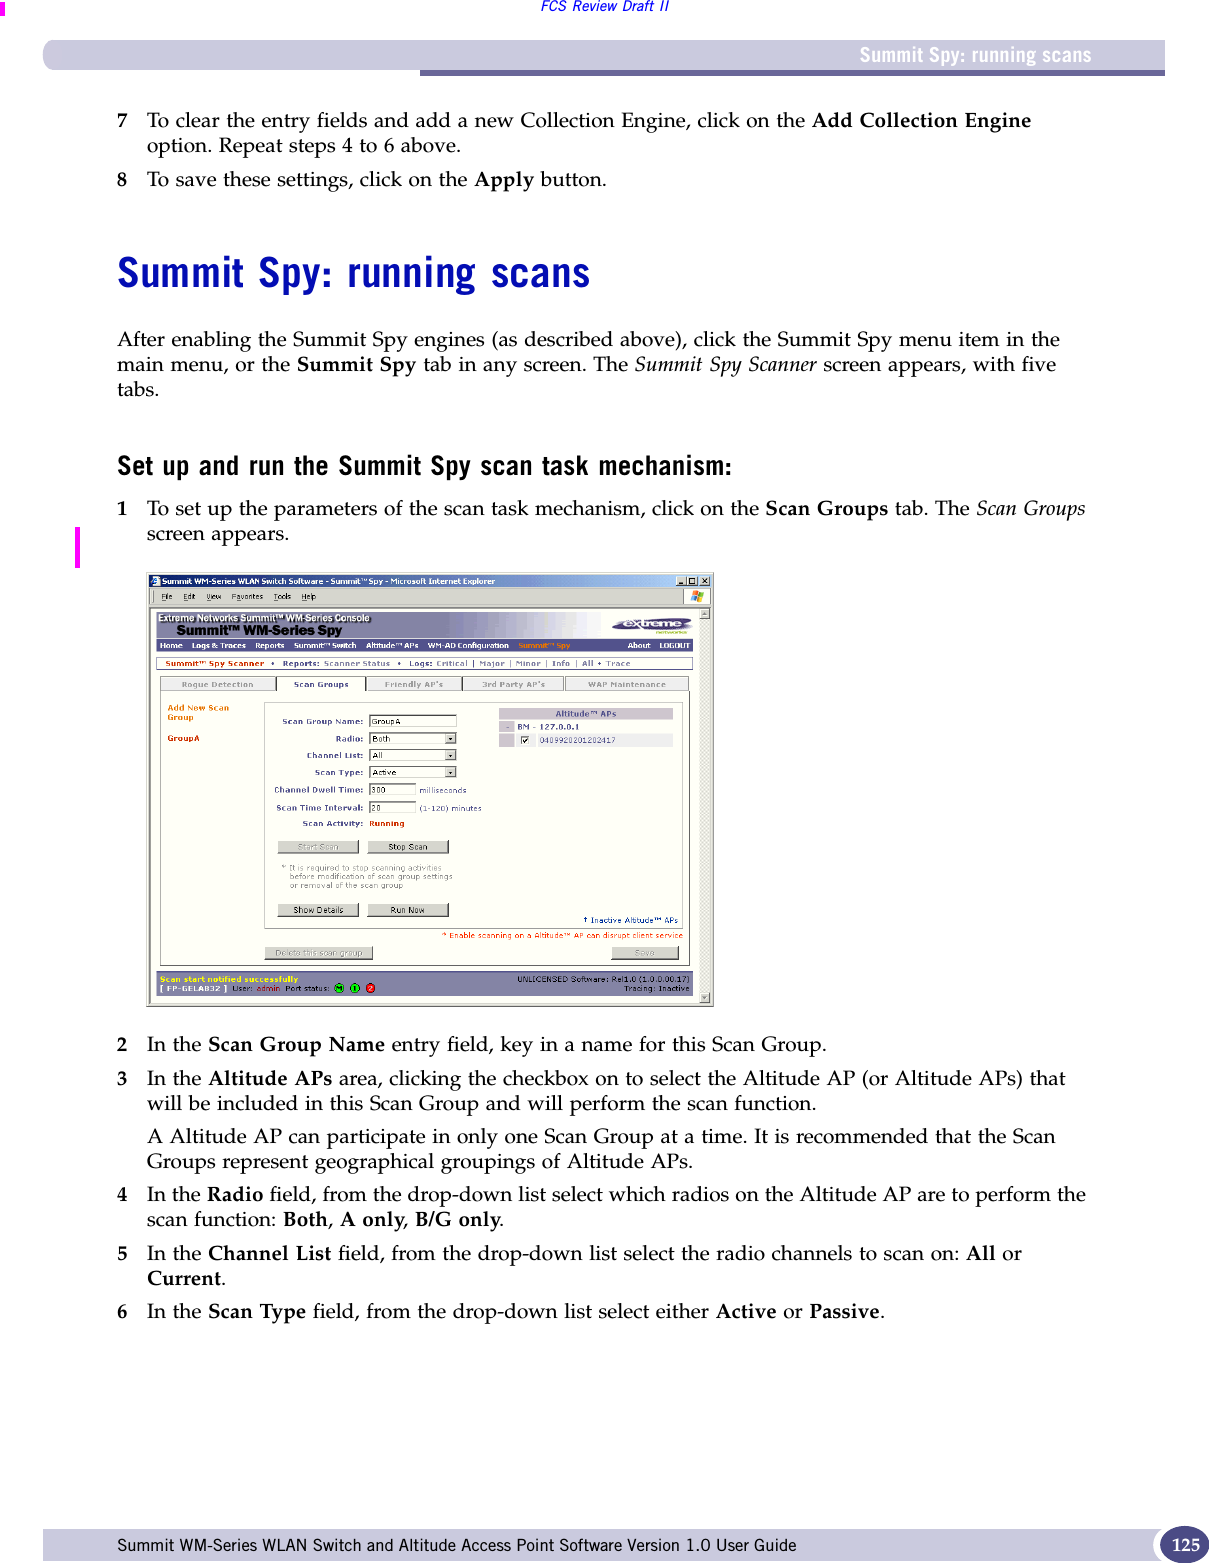 Summit Spy: running scansFCS Review Draft IISummit WM-Series WLAN Switch and Altitude Access Point Software Version 1.0 User Guide 1257To clear the entry fields and add a new Collection Engine, click on the Add Collection Engine option. Repeat steps 4 to 6 above.8To save these settings, click on the Apply button.Summit Spy: running scansAfter enabling the Summit Spy engines (as described above), click the Summit Spy menu item in the main menu, or the Summit Spy tab in any screen. The Summit Spy Scanner screen appears, with five tabs.Set up and run the Summit Spy scan task mechanism:1To set up the parameters of the scan task mechanism, click on the Scan Groups tab. The Scan Groups screen appears.2In the Scan Group Name entry field, key in a name for this Scan Group.3In the Altitude APs area, clicking the checkbox on to select the Altitude AP (or Altitude APs) that will be included in this Scan Group and will perform the scan function. A Altitude AP can participate in only one Scan Group at a time. It is recommended that the Scan Groups represent geographical groupings of Altitude APs.4In the Radio field, from the drop-down list select which radios on the Altitude AP are to perform the scan function: Both, A only, B/G only.5In the Channel List field, from the drop-down list select the radio channels to scan on: All or Current.6In the Scan Type field, from the drop-down list select either Active or Passive.